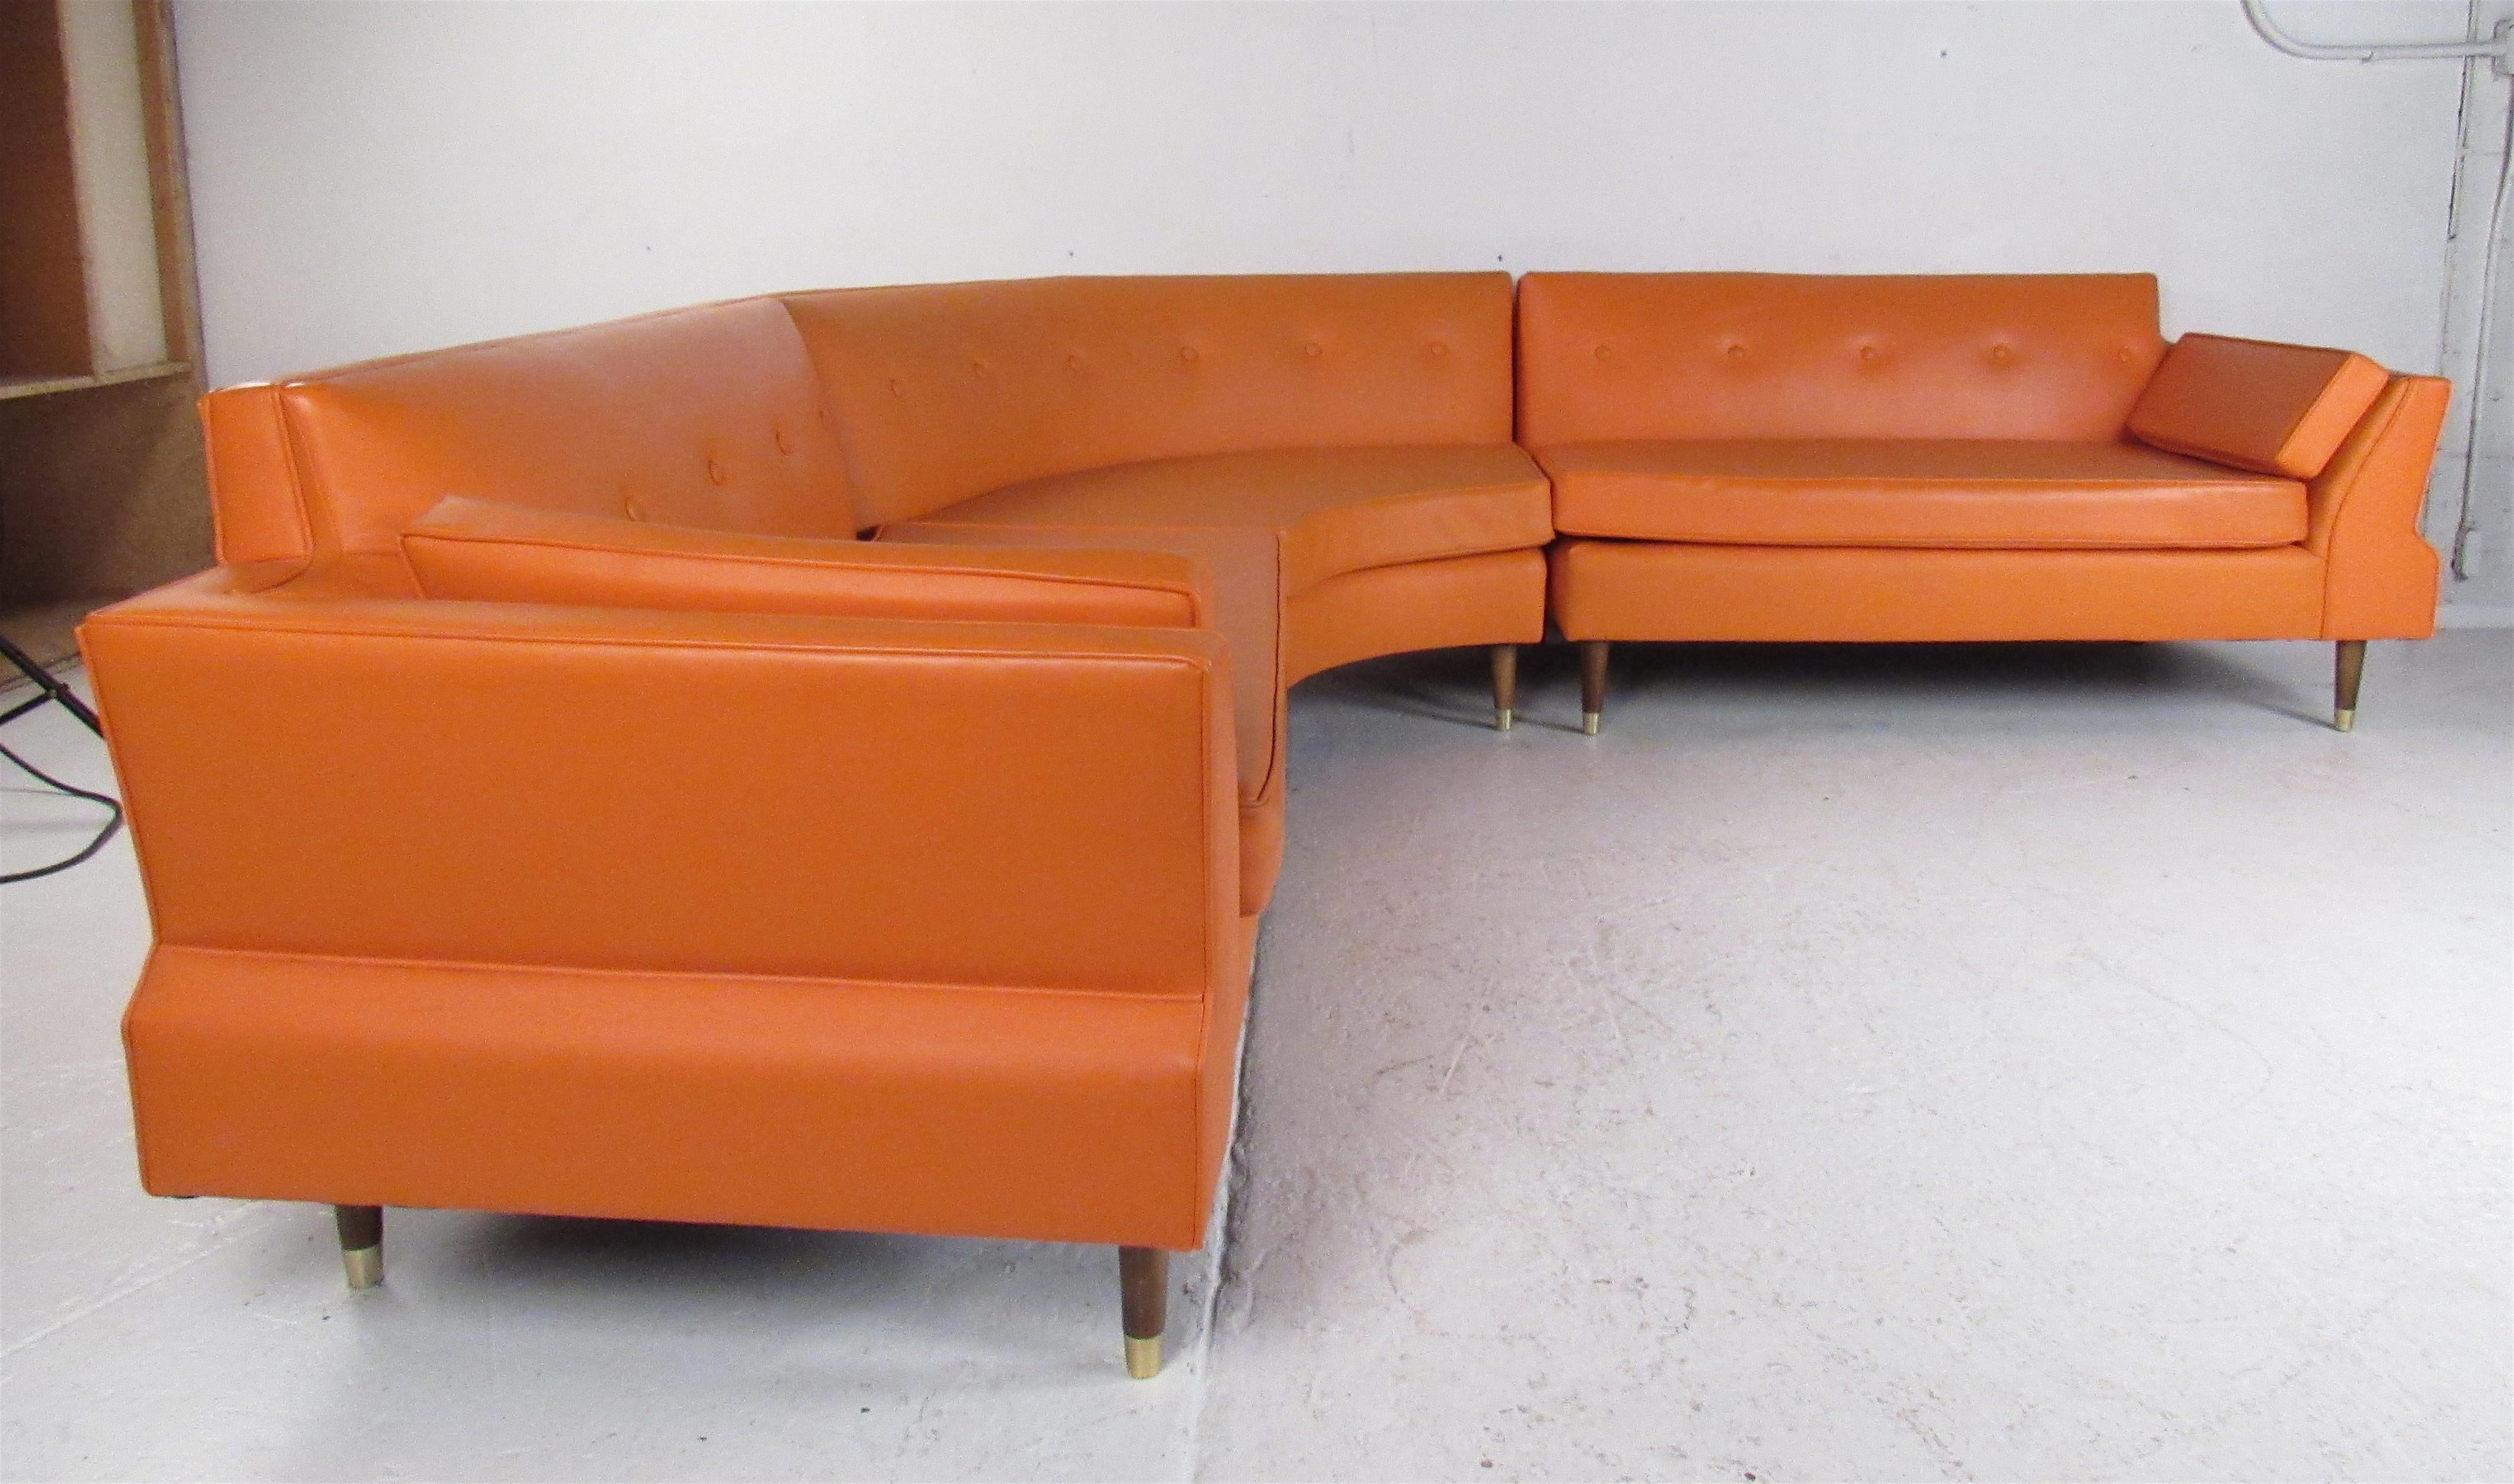 This amazing vintage modern three-piece sectional features an elaborate orange tufted vinyl upholstery. The overstuffed removable cushions, splayed armrests, and stubby walnut legs show quality. An extremely comfortable design with brass capped feet